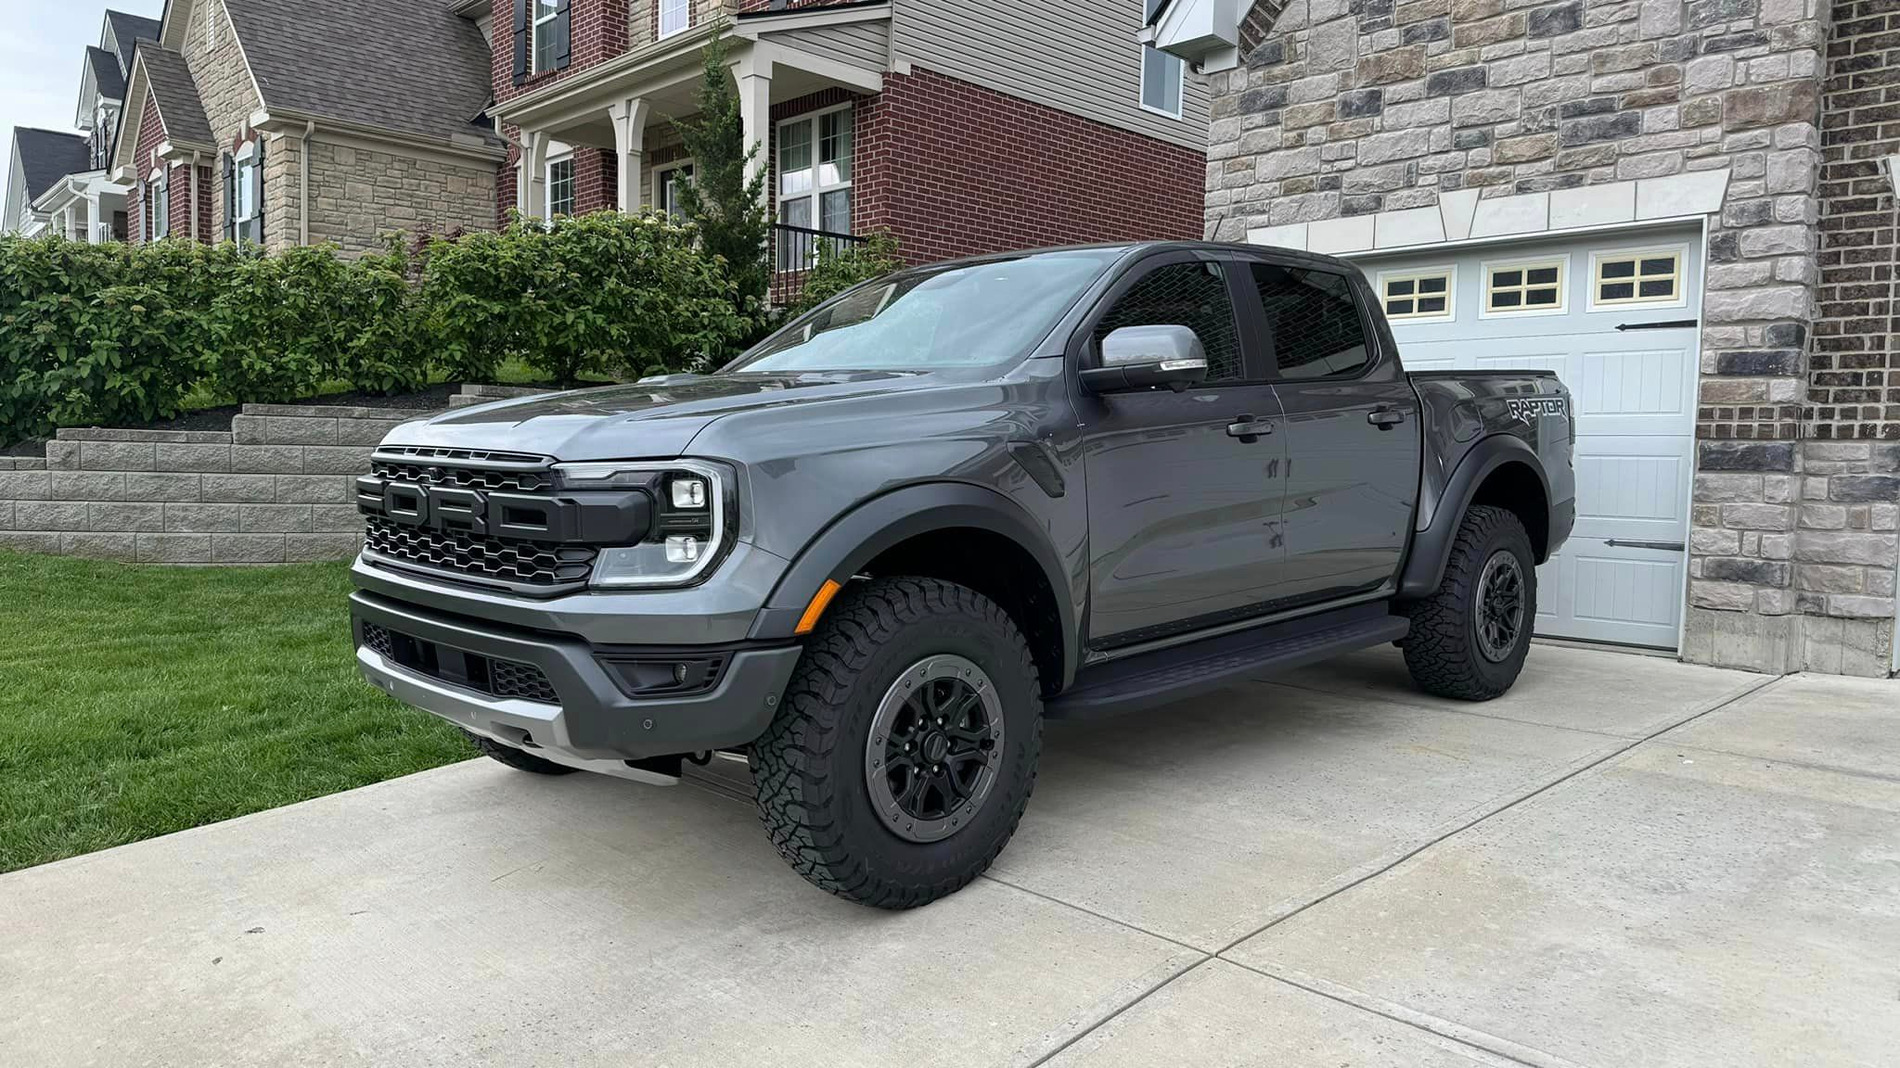 Ford Ranger Picked up my Baby Raptor (No Pre-Order, Paid MSRP, bought in Kentucky 26APR) 438197842_10106877276260424_5308464919392009295_n